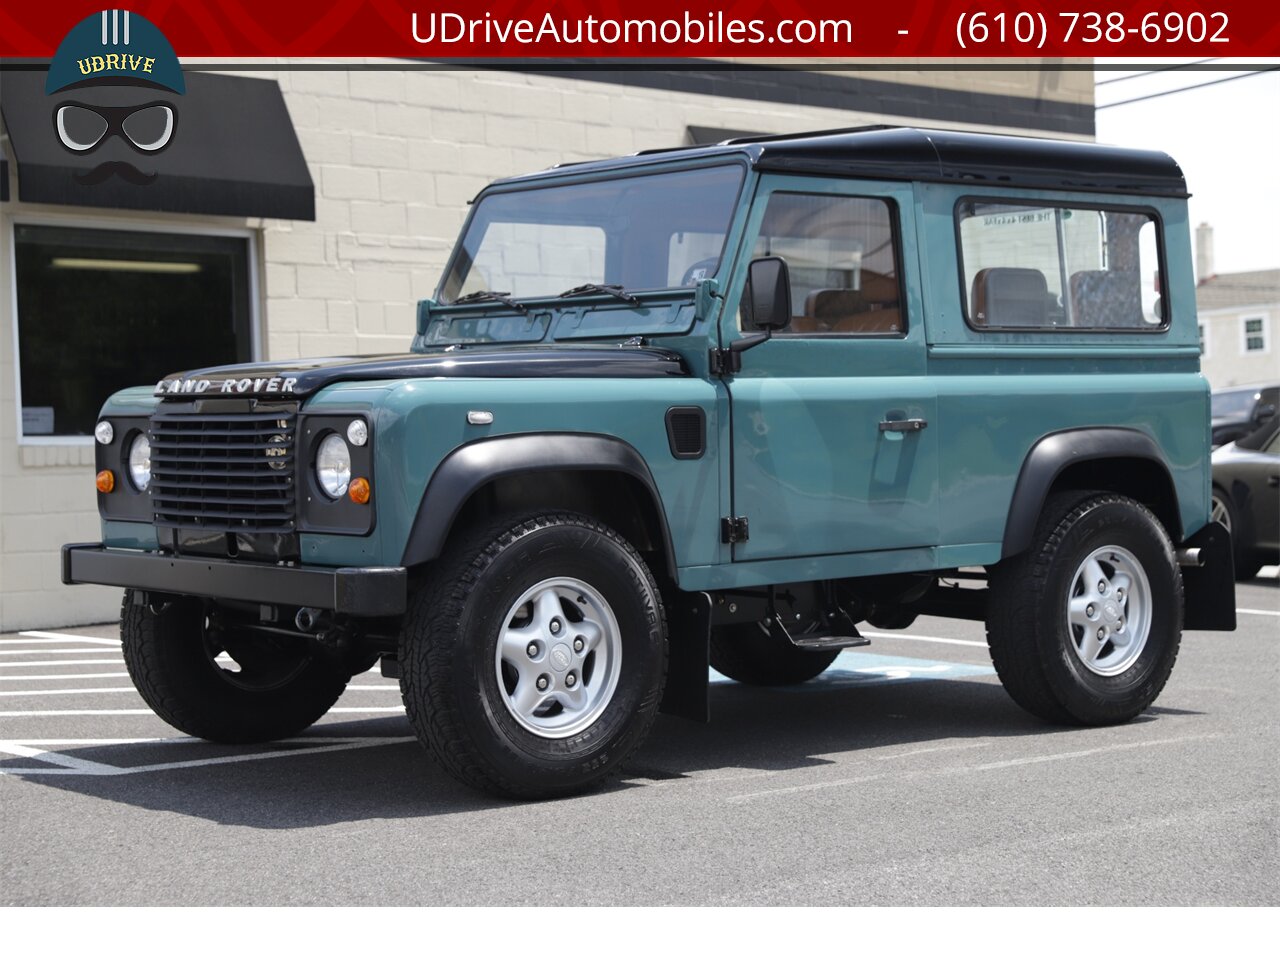 1986 Land Rover Defender 90 D90 4.0L V8 5 Speed Manual New Interior  $25k Recent Engine Build - Photo 10 - West Chester, PA 19382